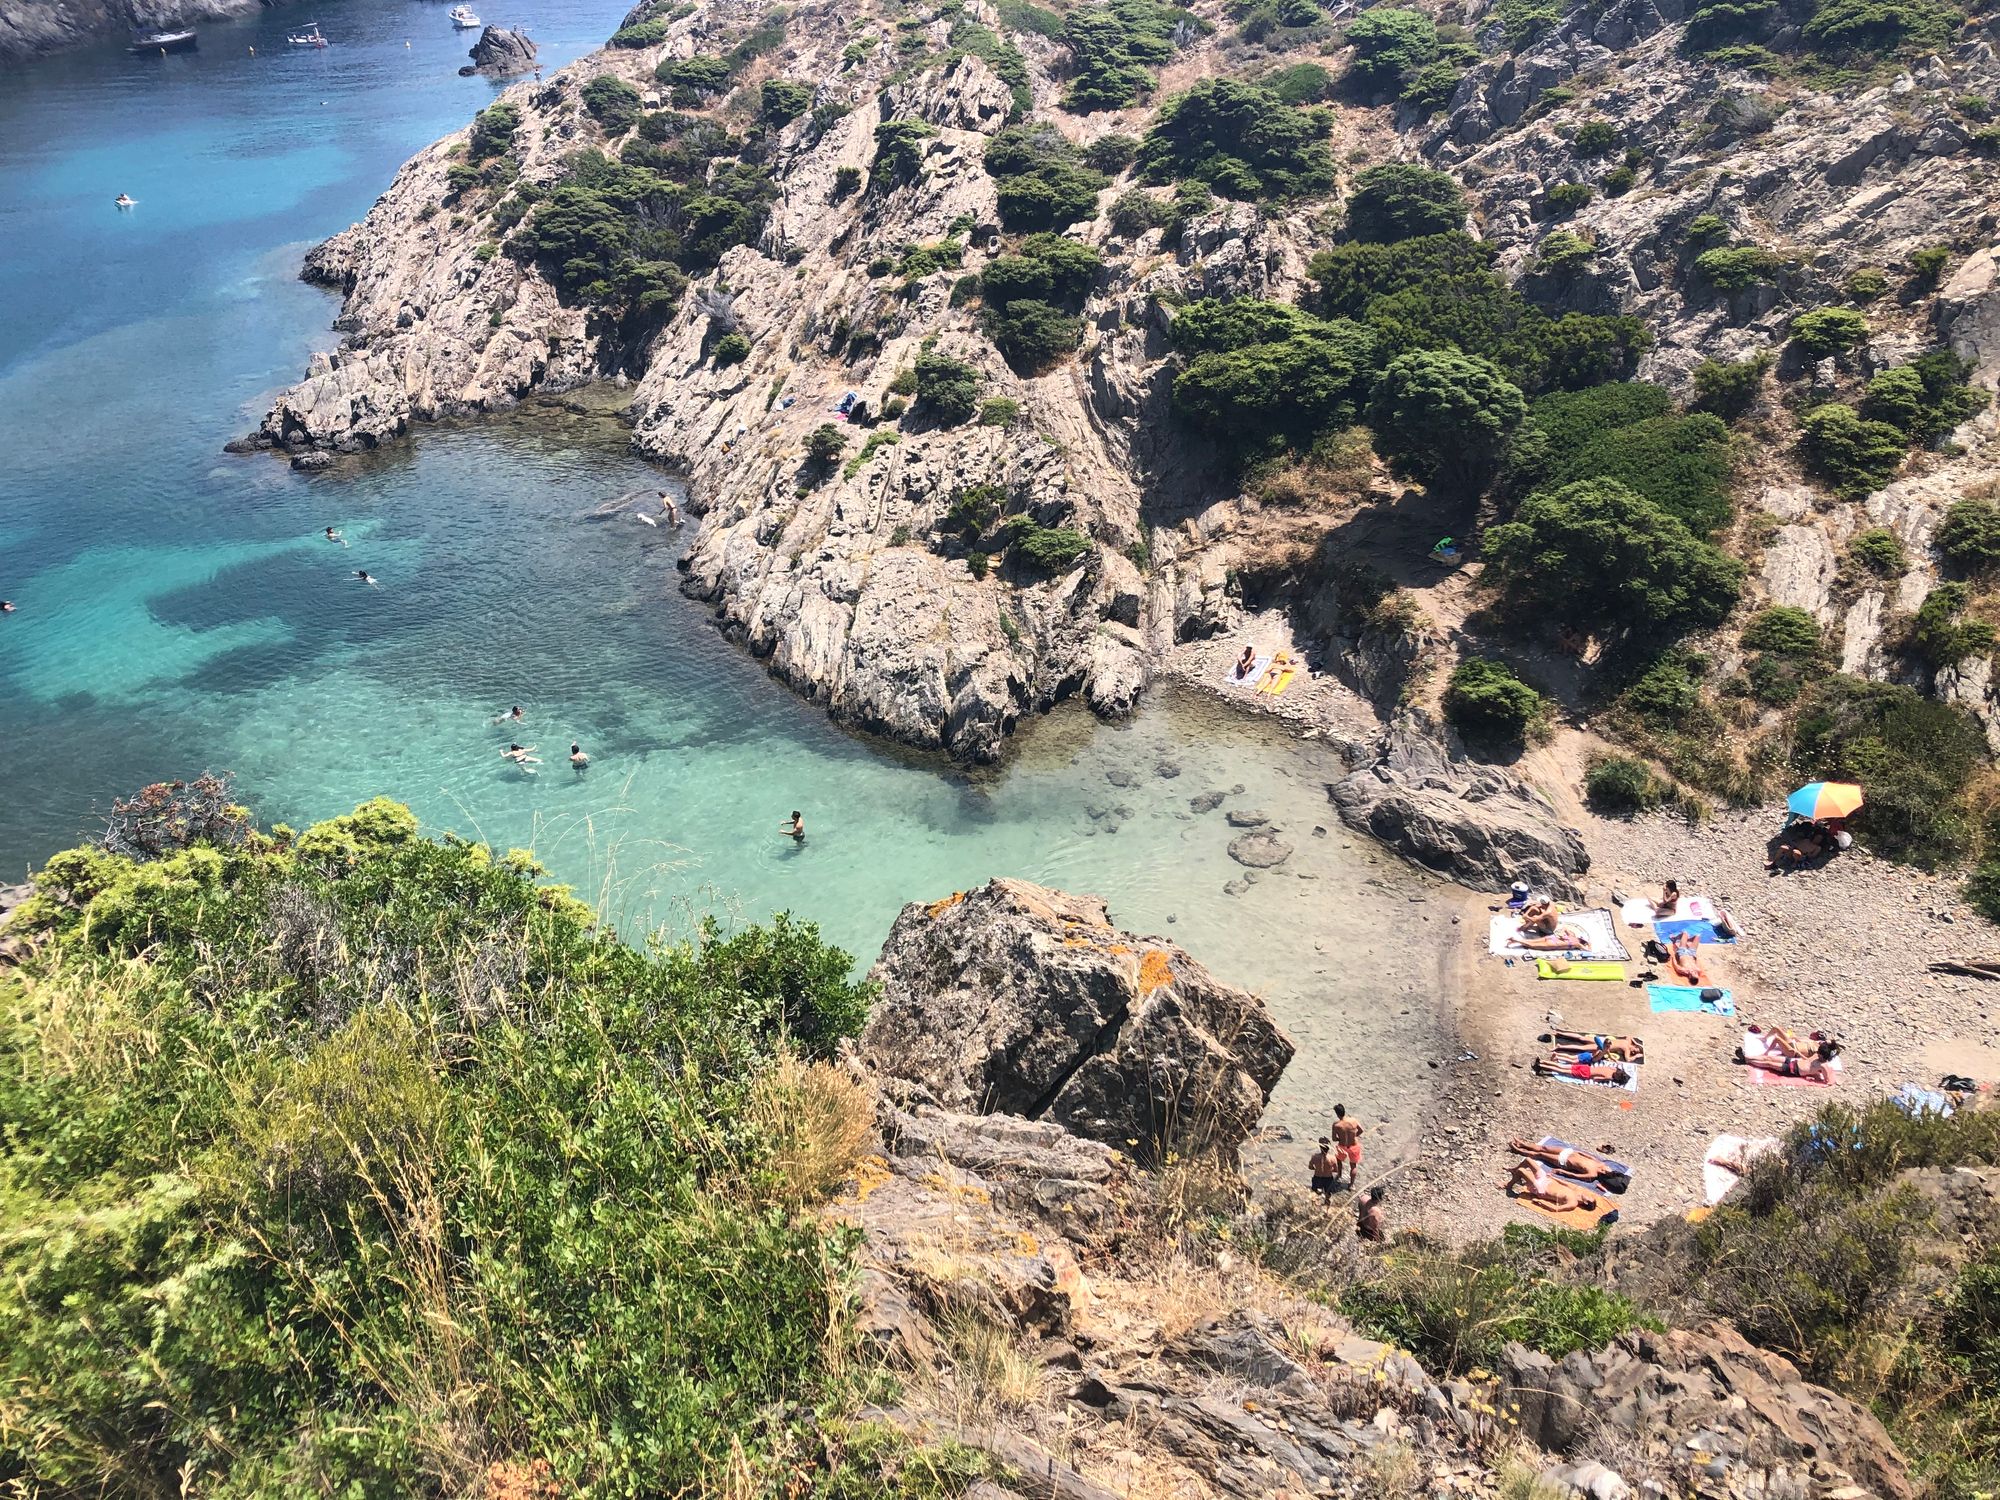 aerial view of a cove with some people sunbathing. turqouise waters between rocky cliffs and shrubs 